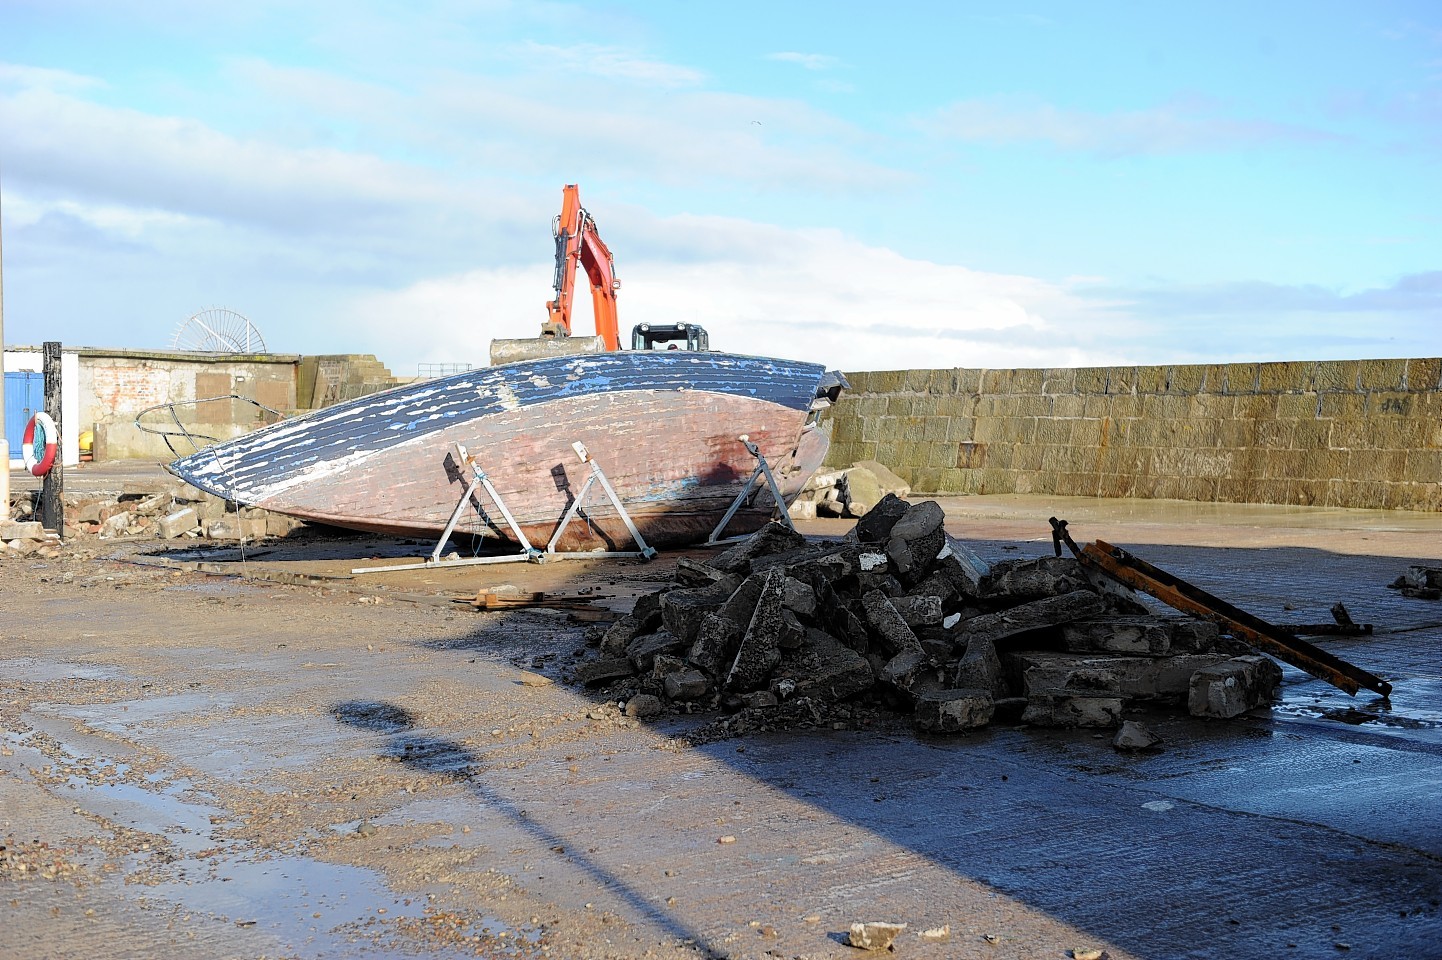 The flooding clean up begins at Lossiemouth where a boat was knocked over by the waves